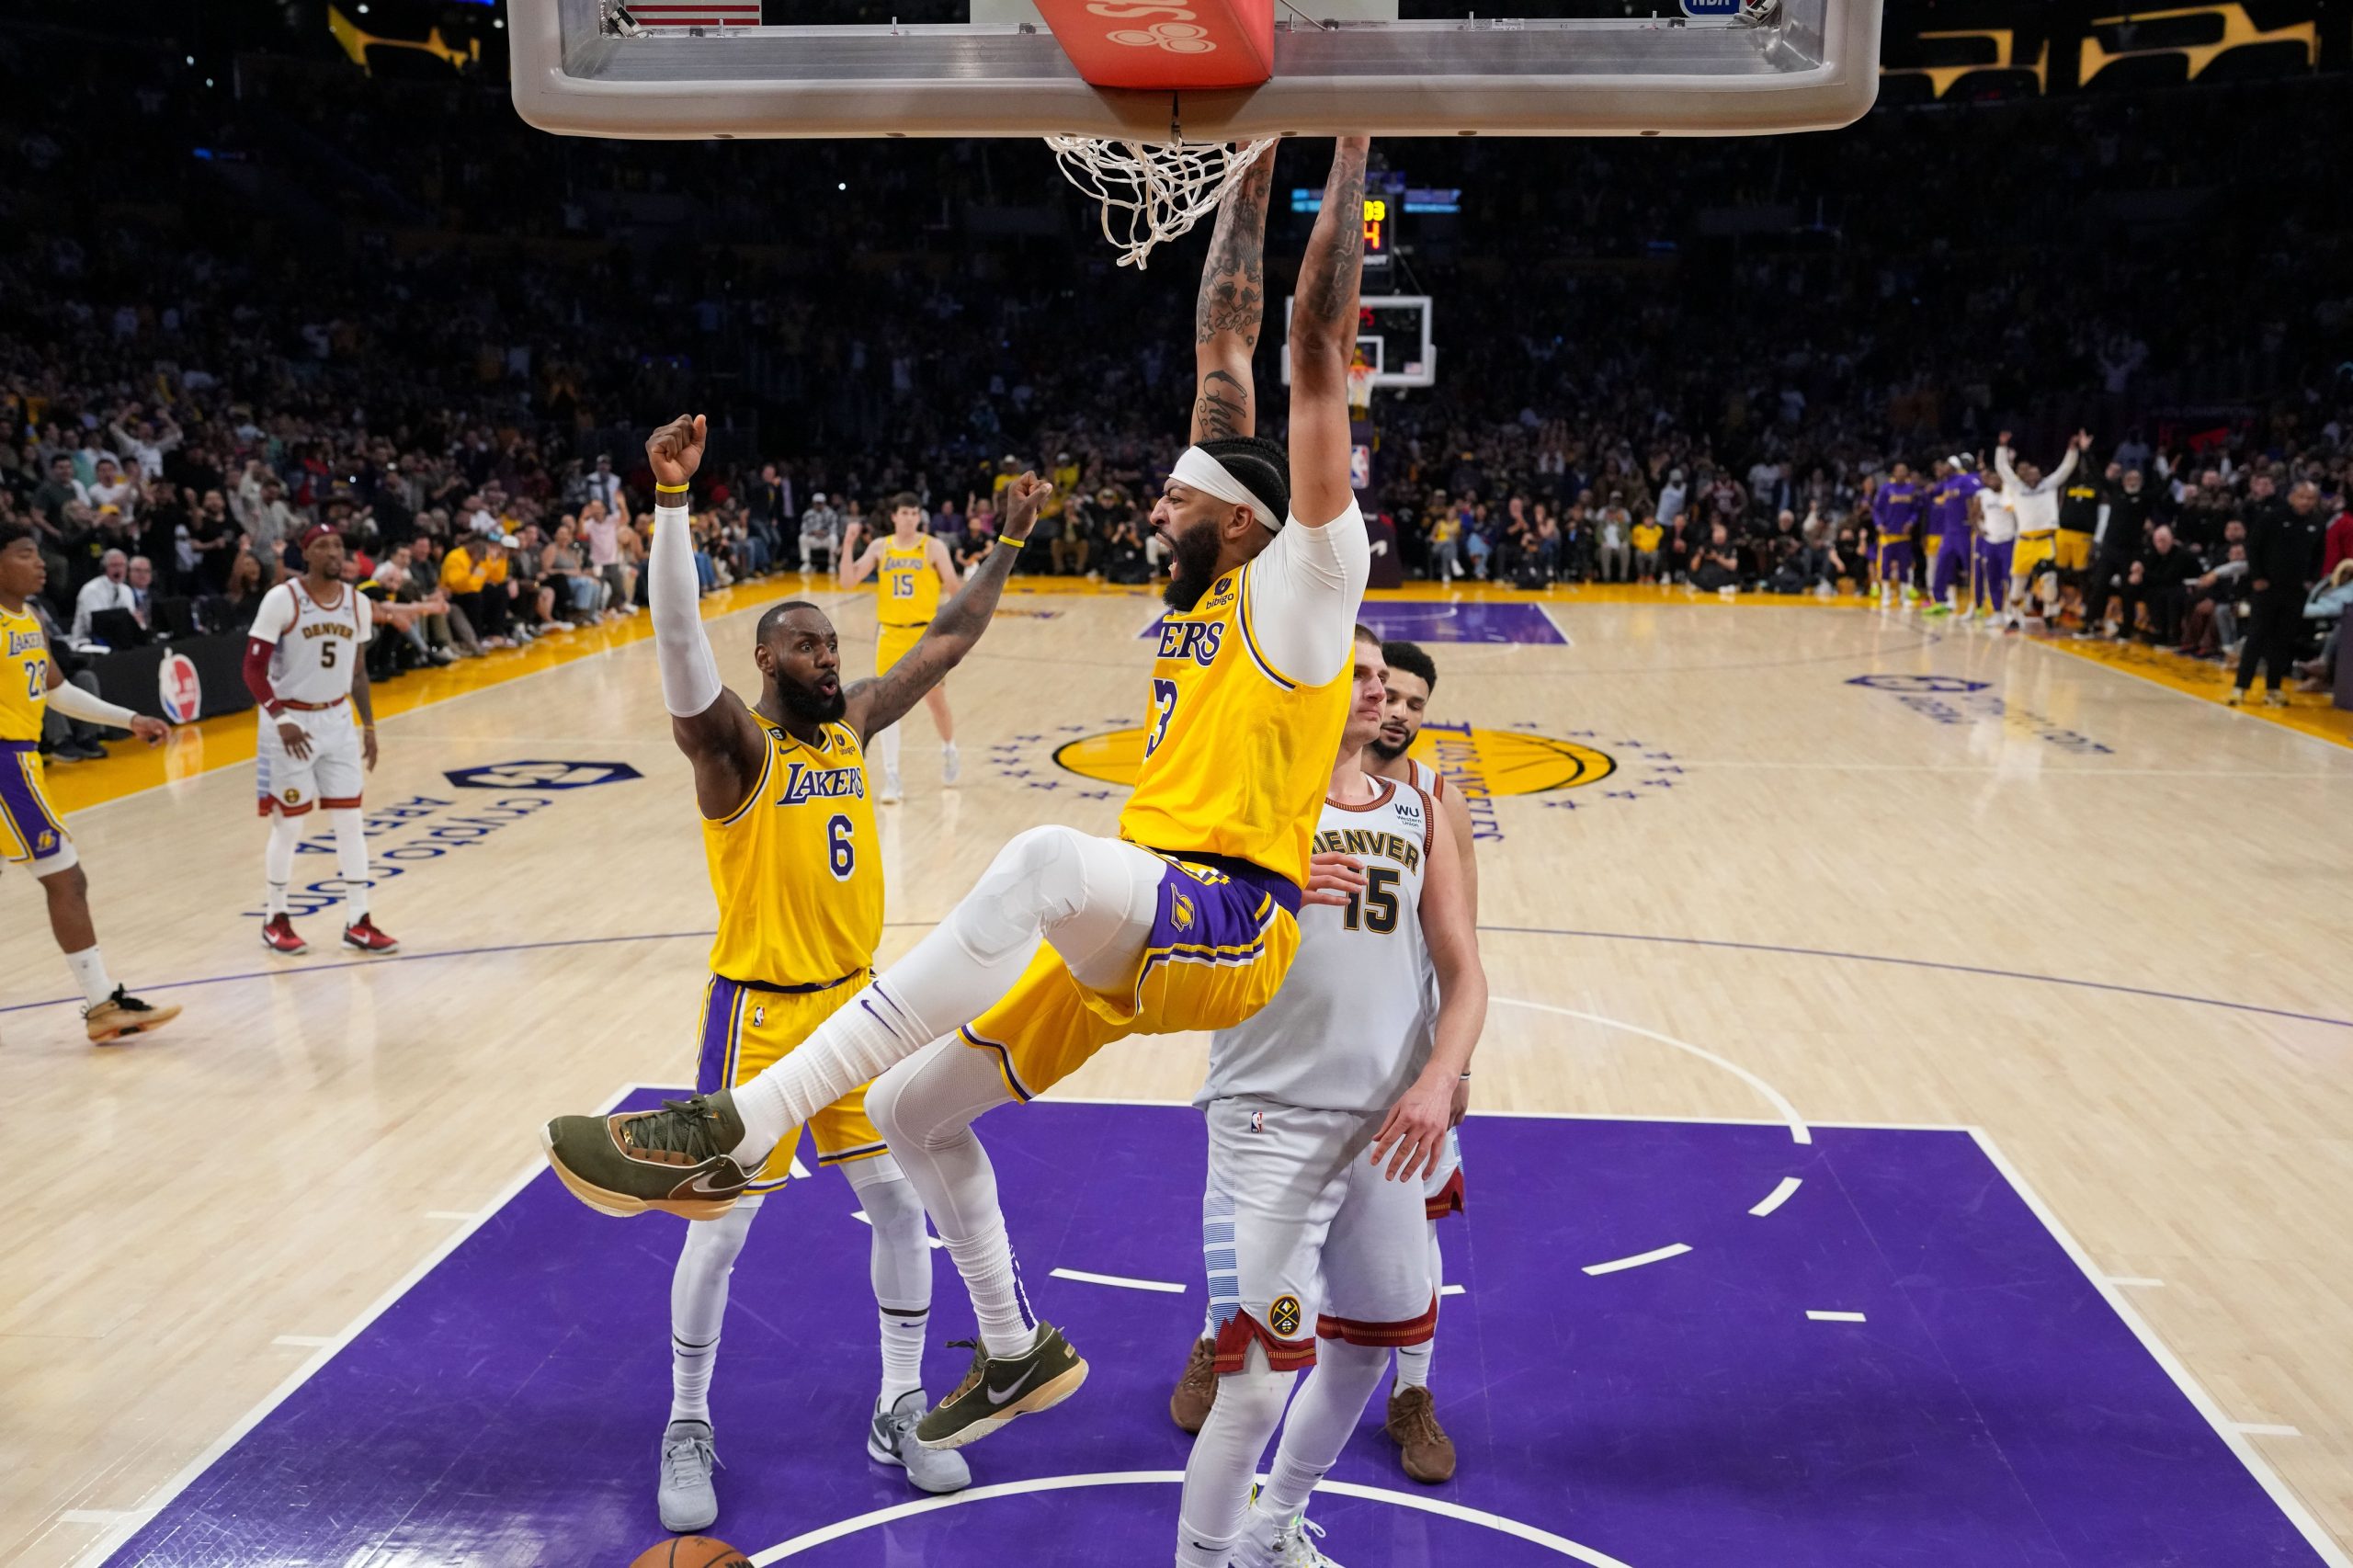 May 22, 2023; Los Angeles, California, USA; Los Angeles Lakers forward Anthony Davis (3) dunks the ball against Denver Nuggets center Nikola Jokic (15) during the fourth quarter in game four of the Western Conference Finals for the 2023 NBA playoffs at Crypto.com Arena. Mandatory Credit: Kirby Lee-USA TODAY Sports